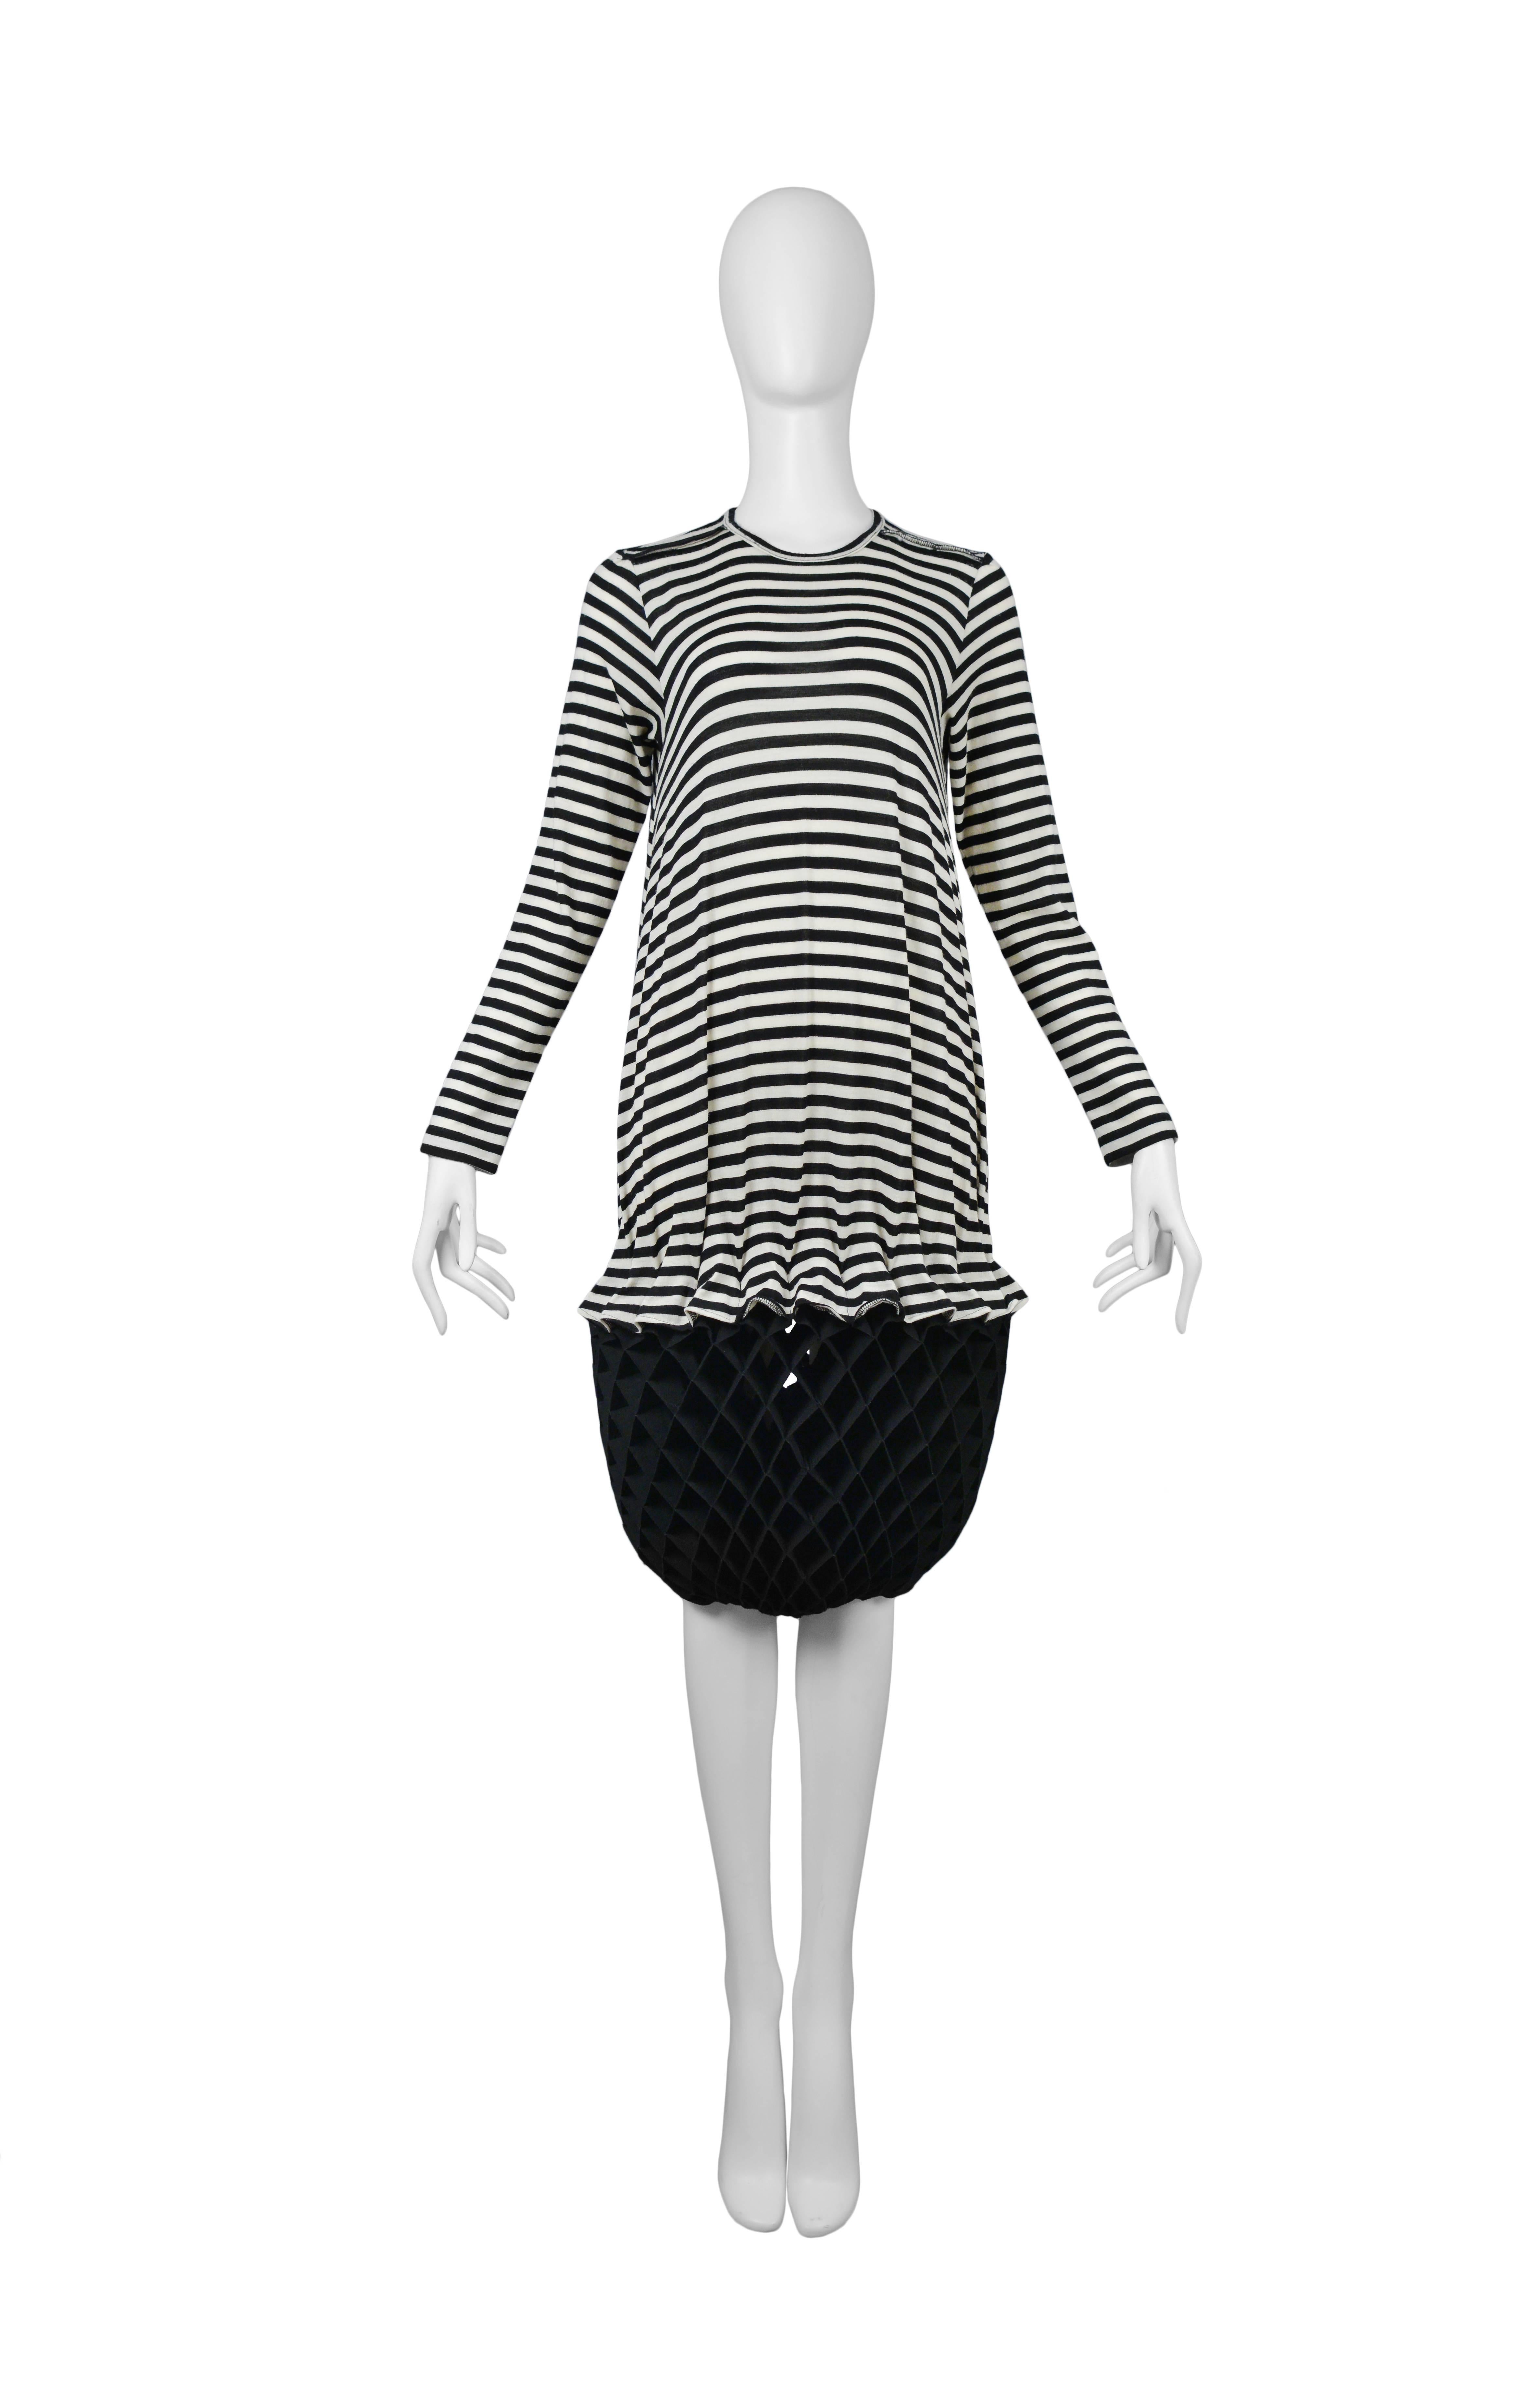 Junya Watanabe black and white stripe dress featuring a drop waist with black accordion detailing. Circa Autumn / Winter 2015.
Please inquire for additional images.